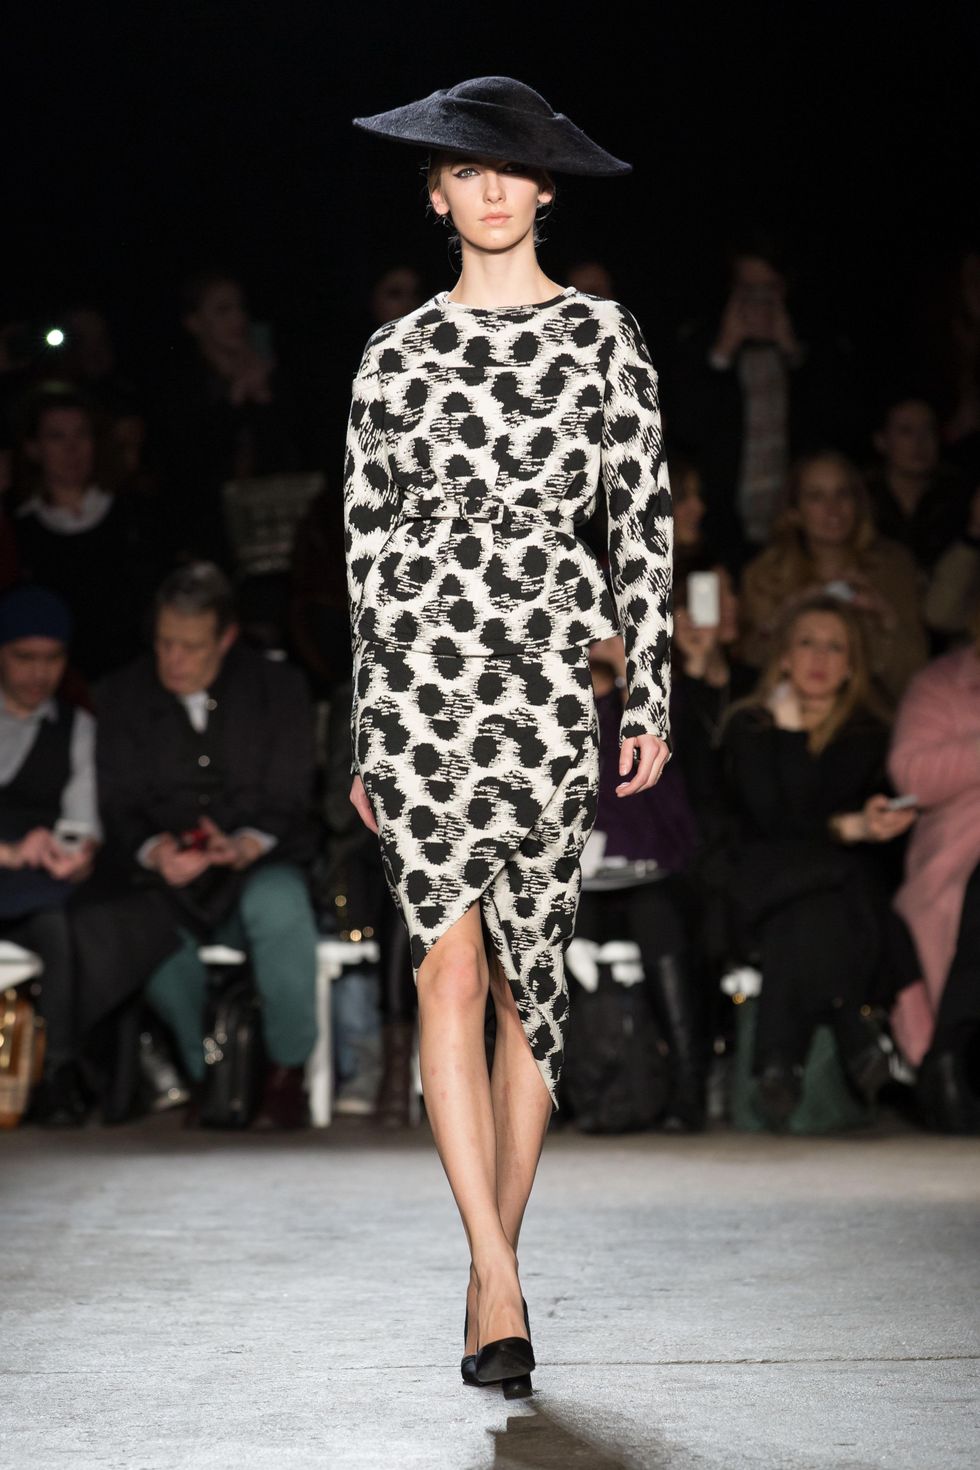 Christian Siriano fall collection look 5